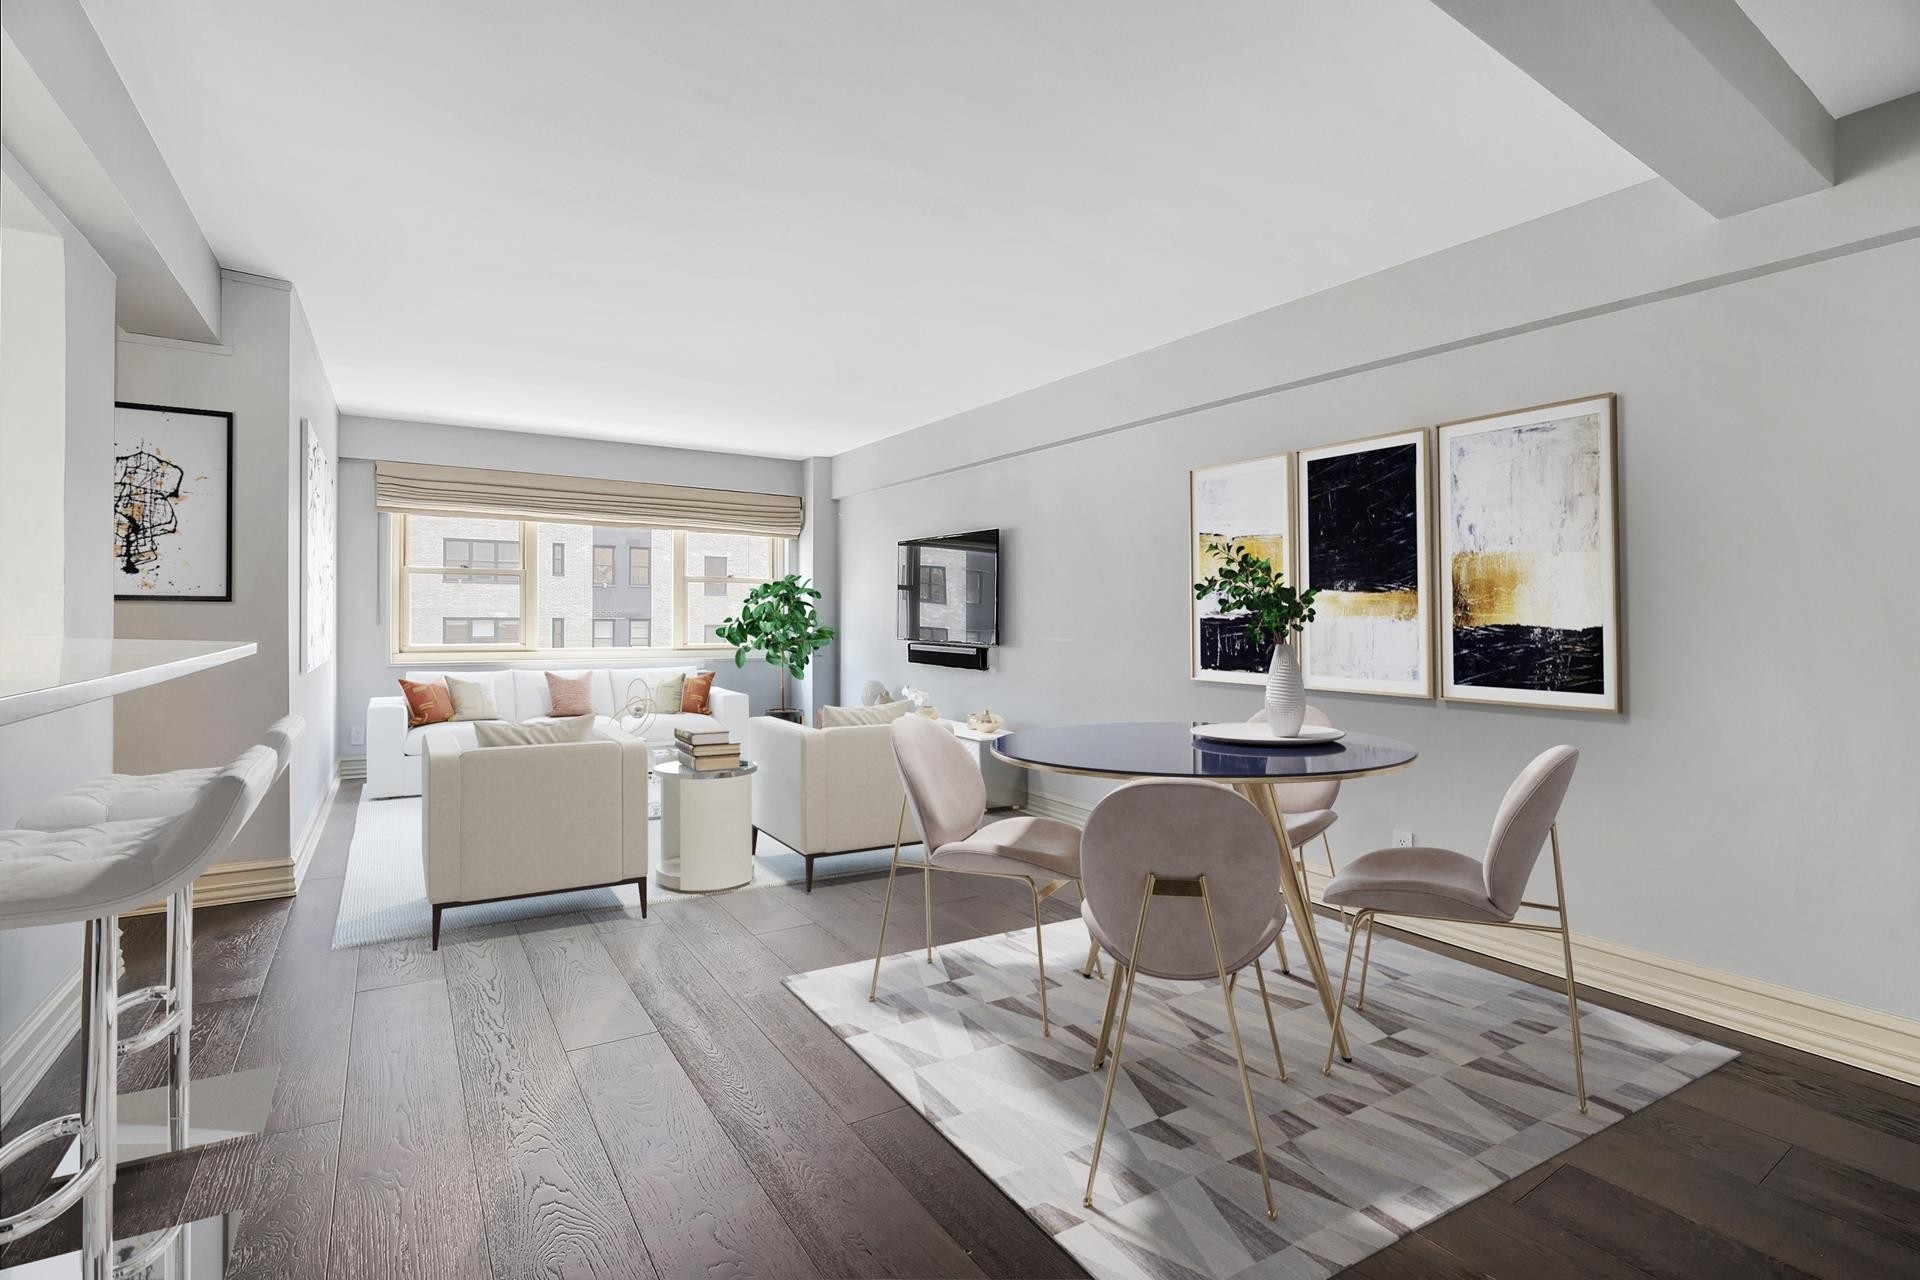 Co-op Properties for Sale at Sutton East, 345 E 56TH ST, 9E Midtown East, New York, New York 10022